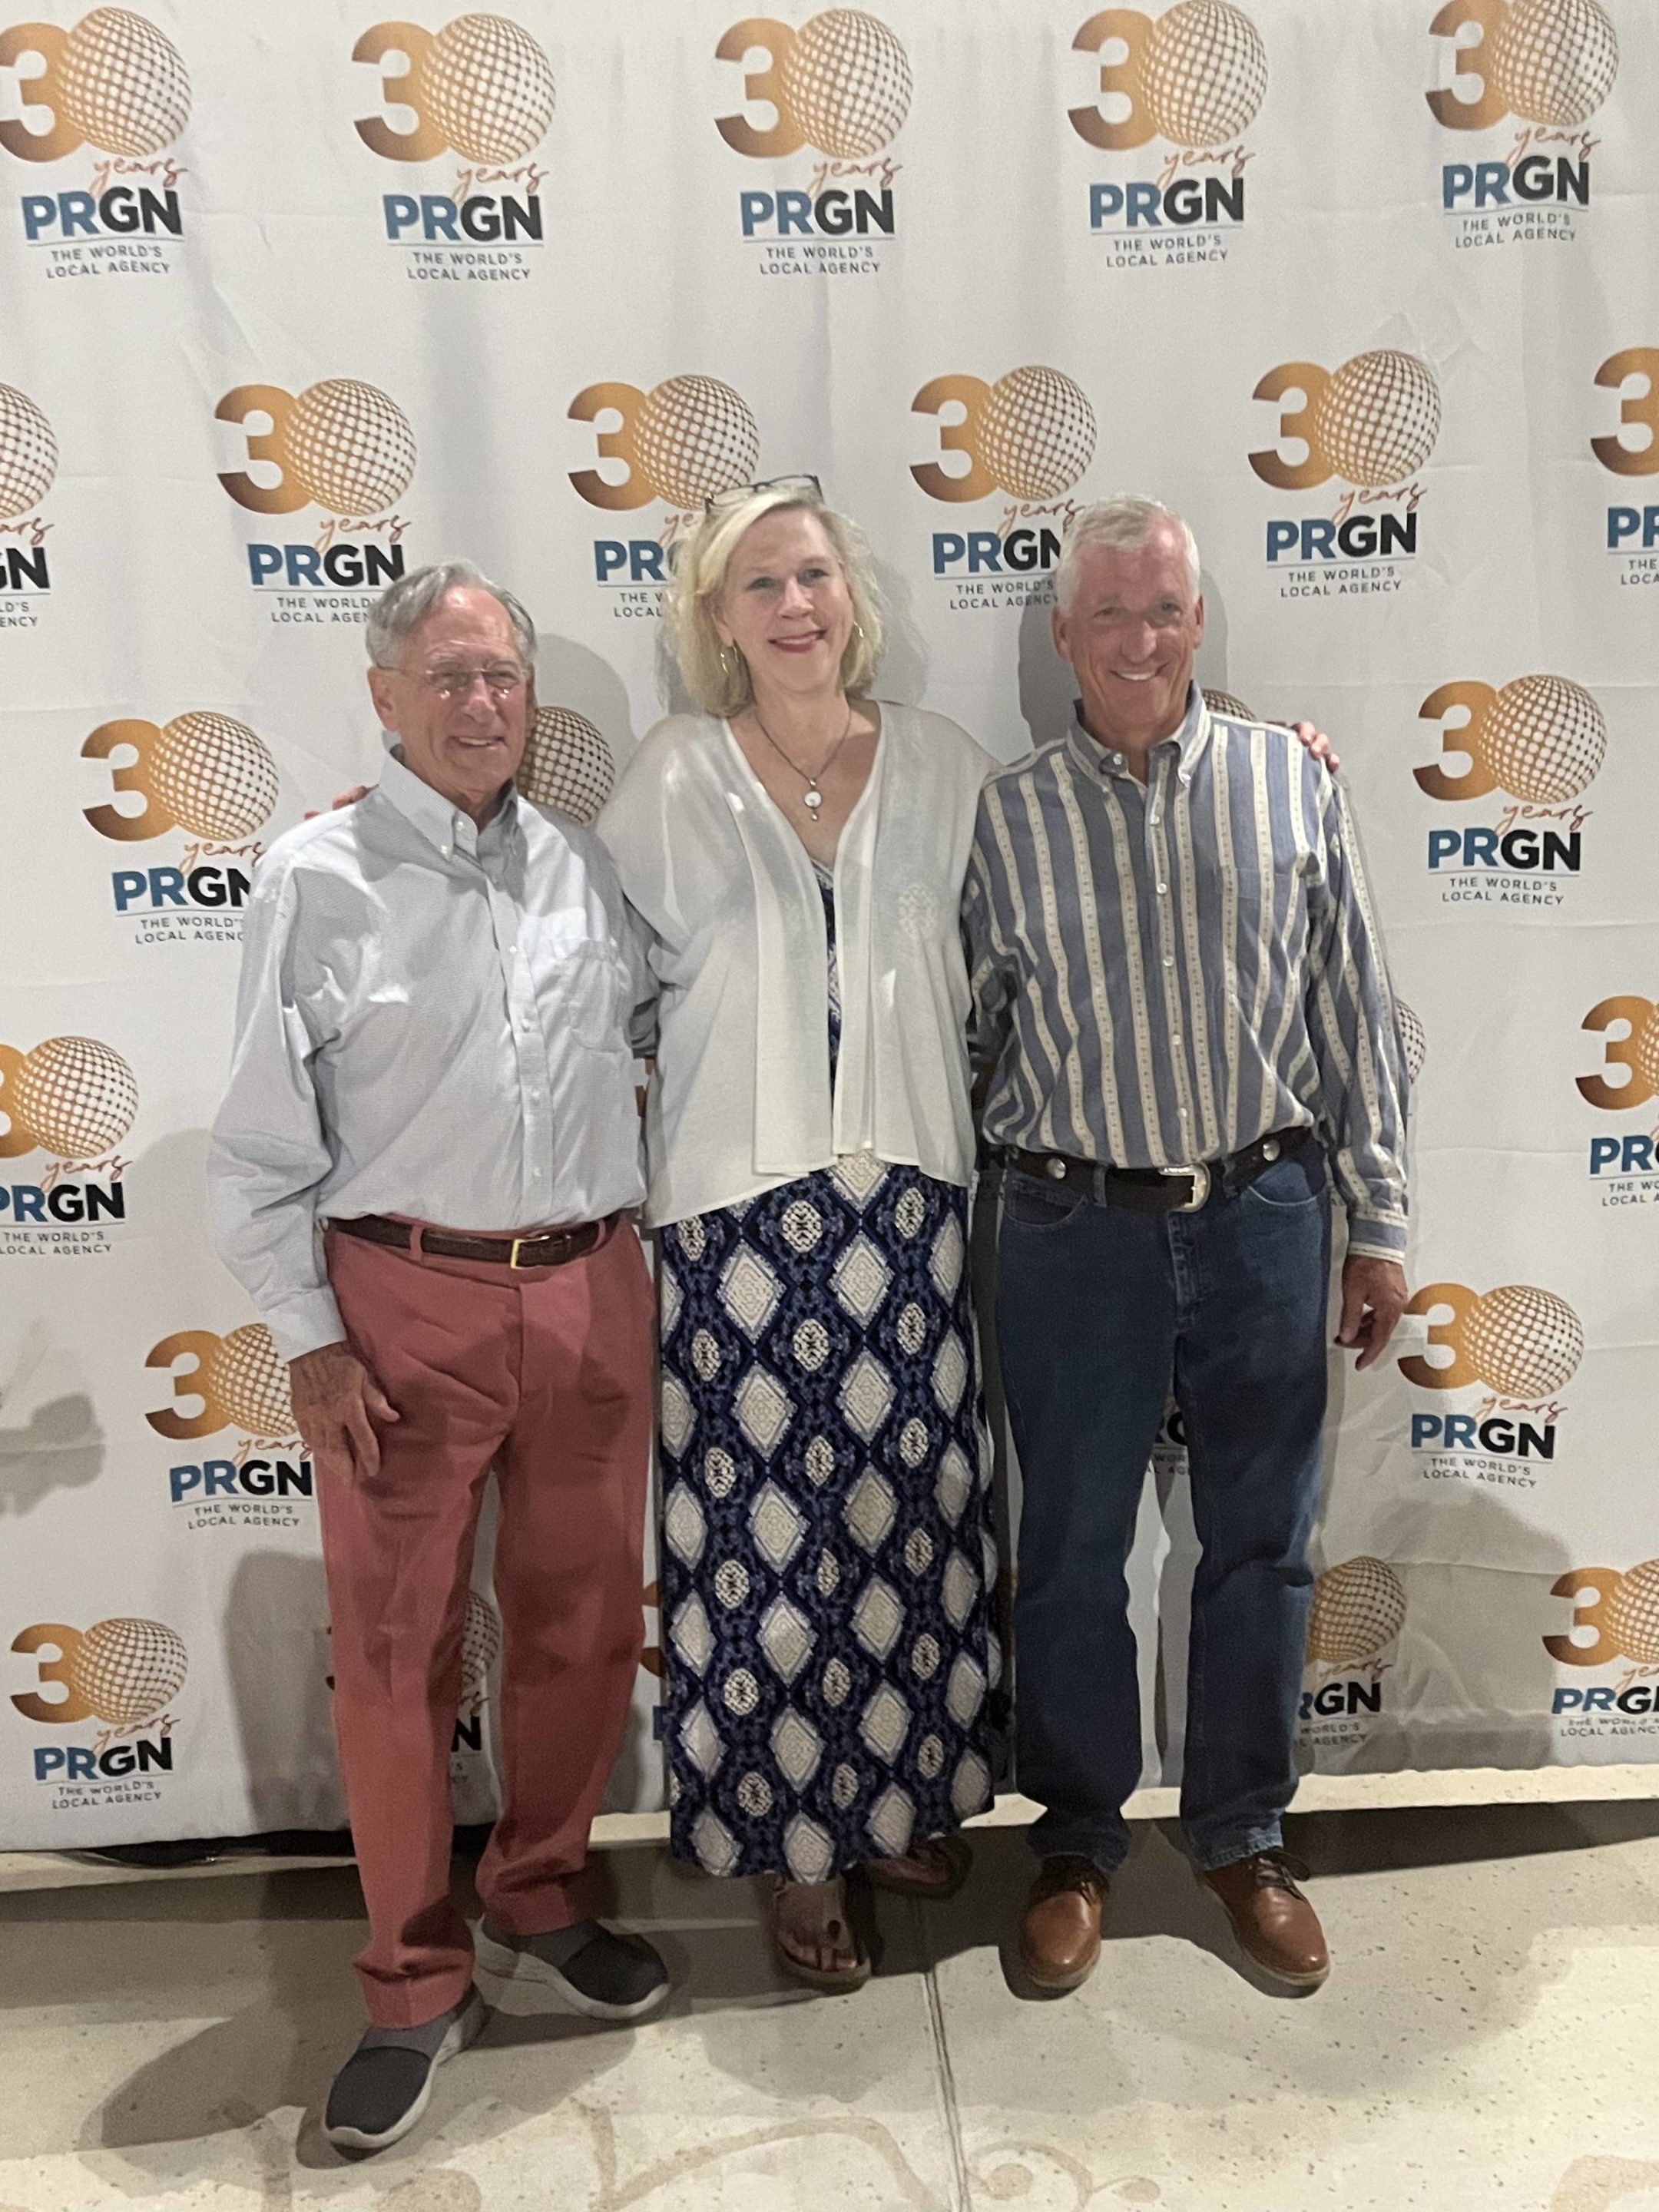 PRGN celebrates its 30th anniversary: A Q&A with the founders